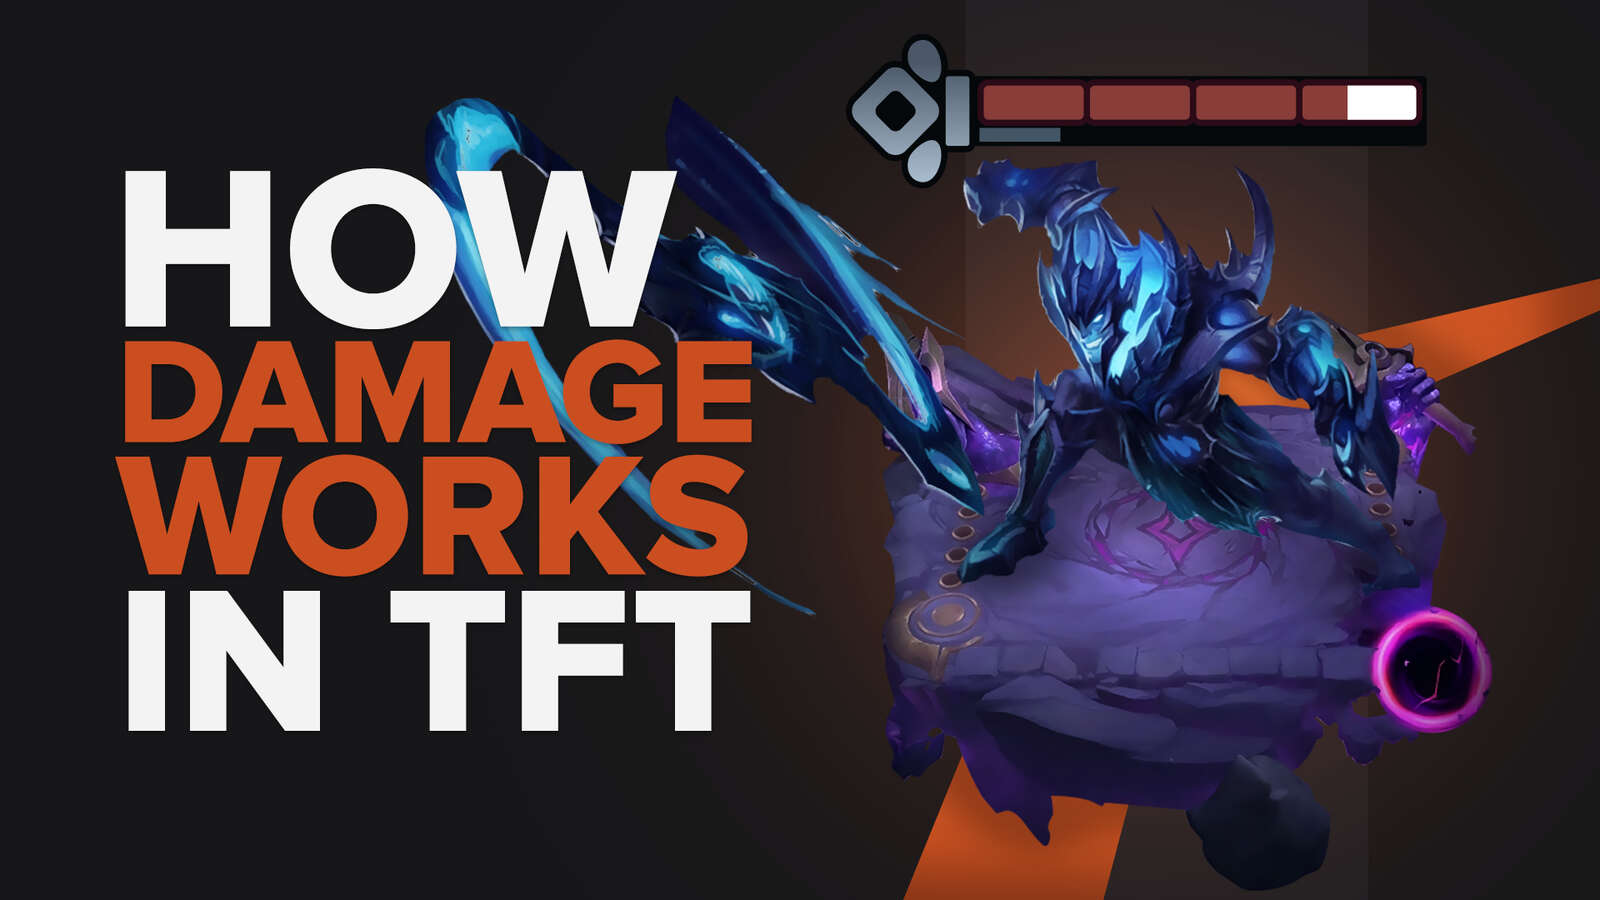 All About How Damage Works in Teamfight Tactics [In-Depth]